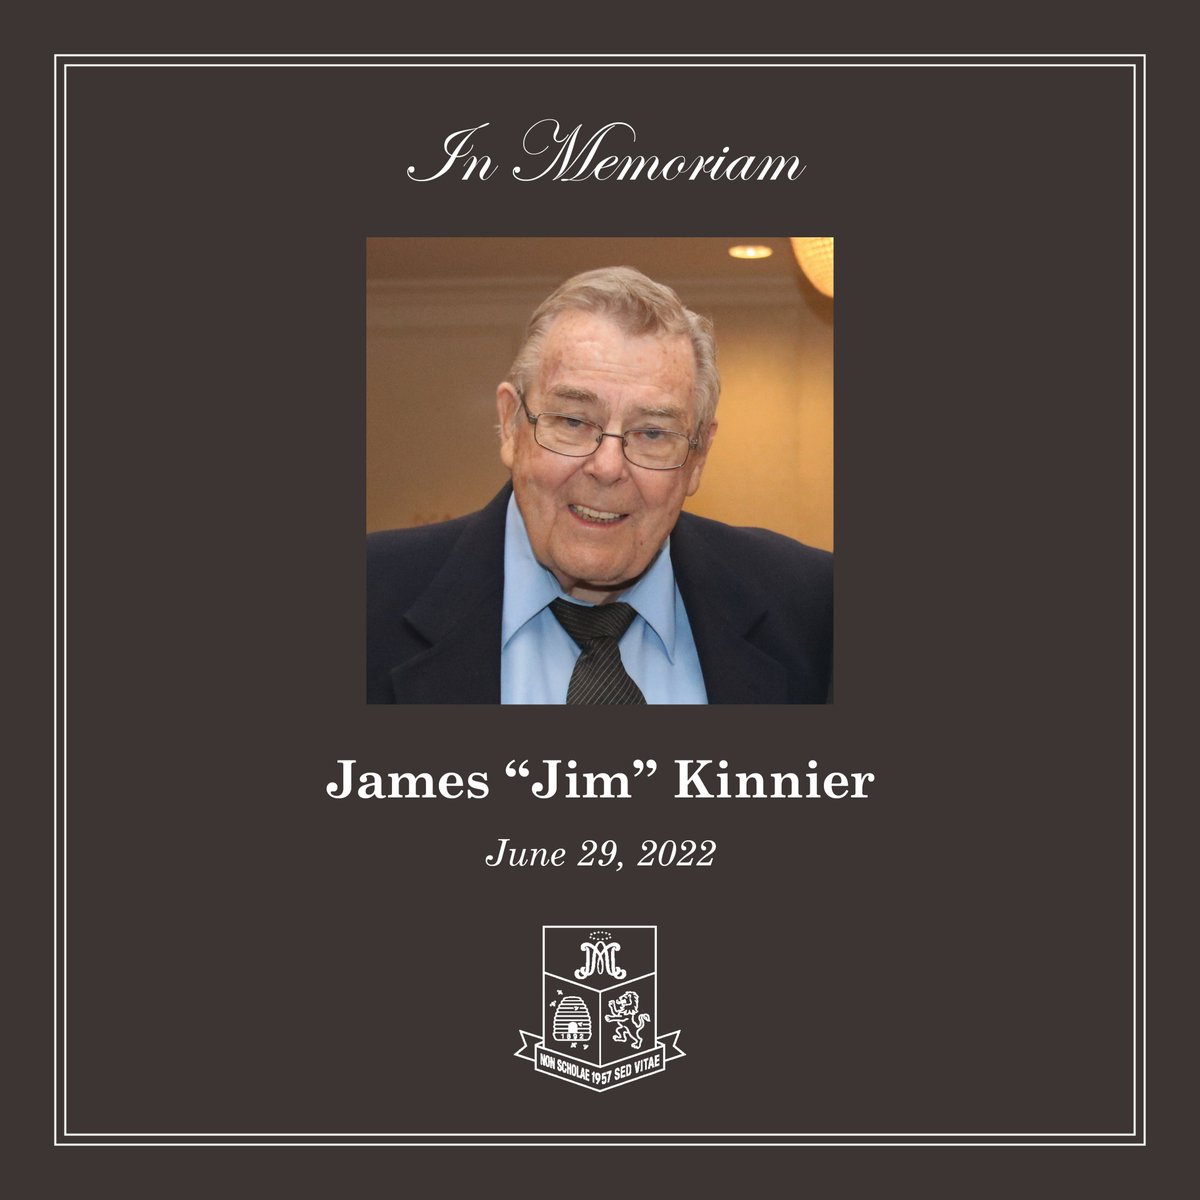 It is with sadness that Archbishop Molloy High School shares the passing of Mr. James “Jim” Kinnier on June 29, 2022. Mr. Kinnier was a beloved member of the Molloy community for over 61 years. More information: molloyhs.org/apps/news/arti…